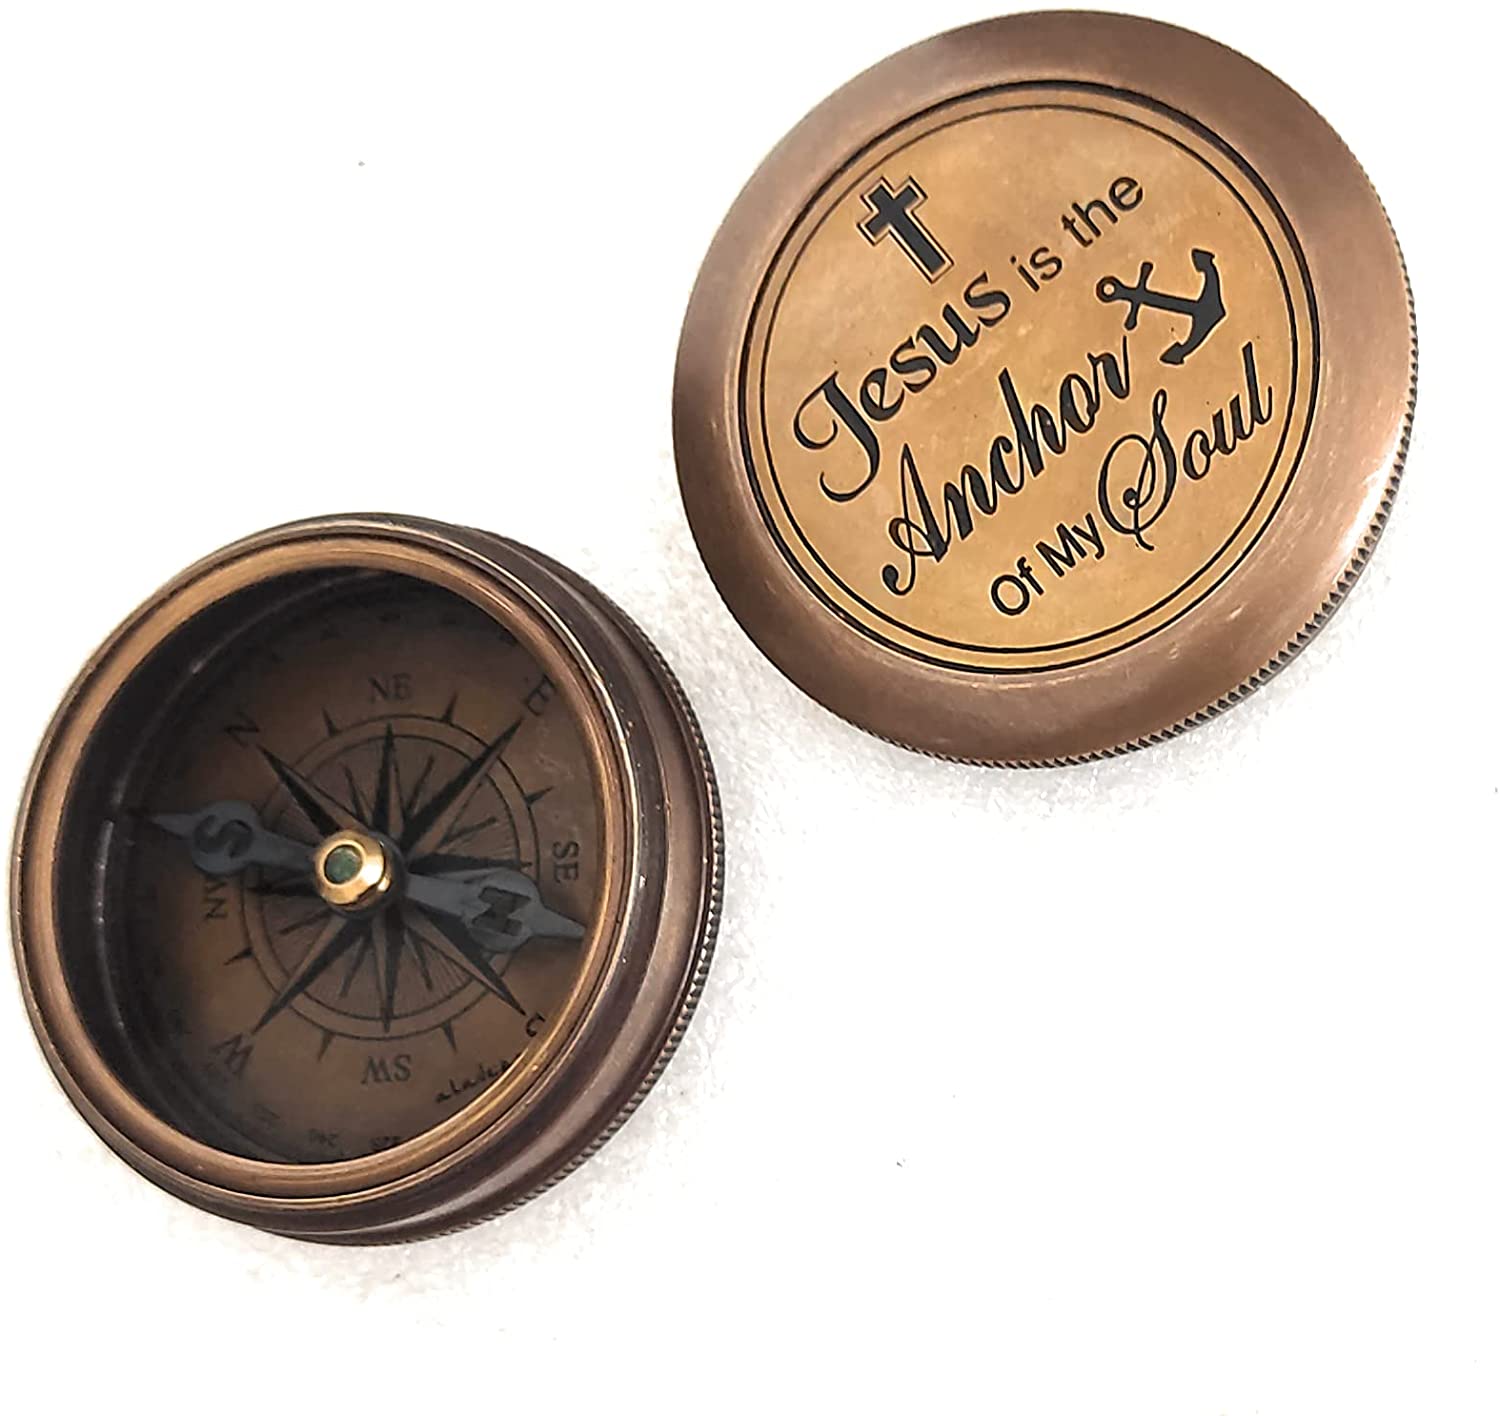 Religious Gifts - Sundial Compass - Christian Gifts for Men, Catholic  Gifts, Baptism Gifts for Boys, Gifts for Teen Boys, Graduation Gifts